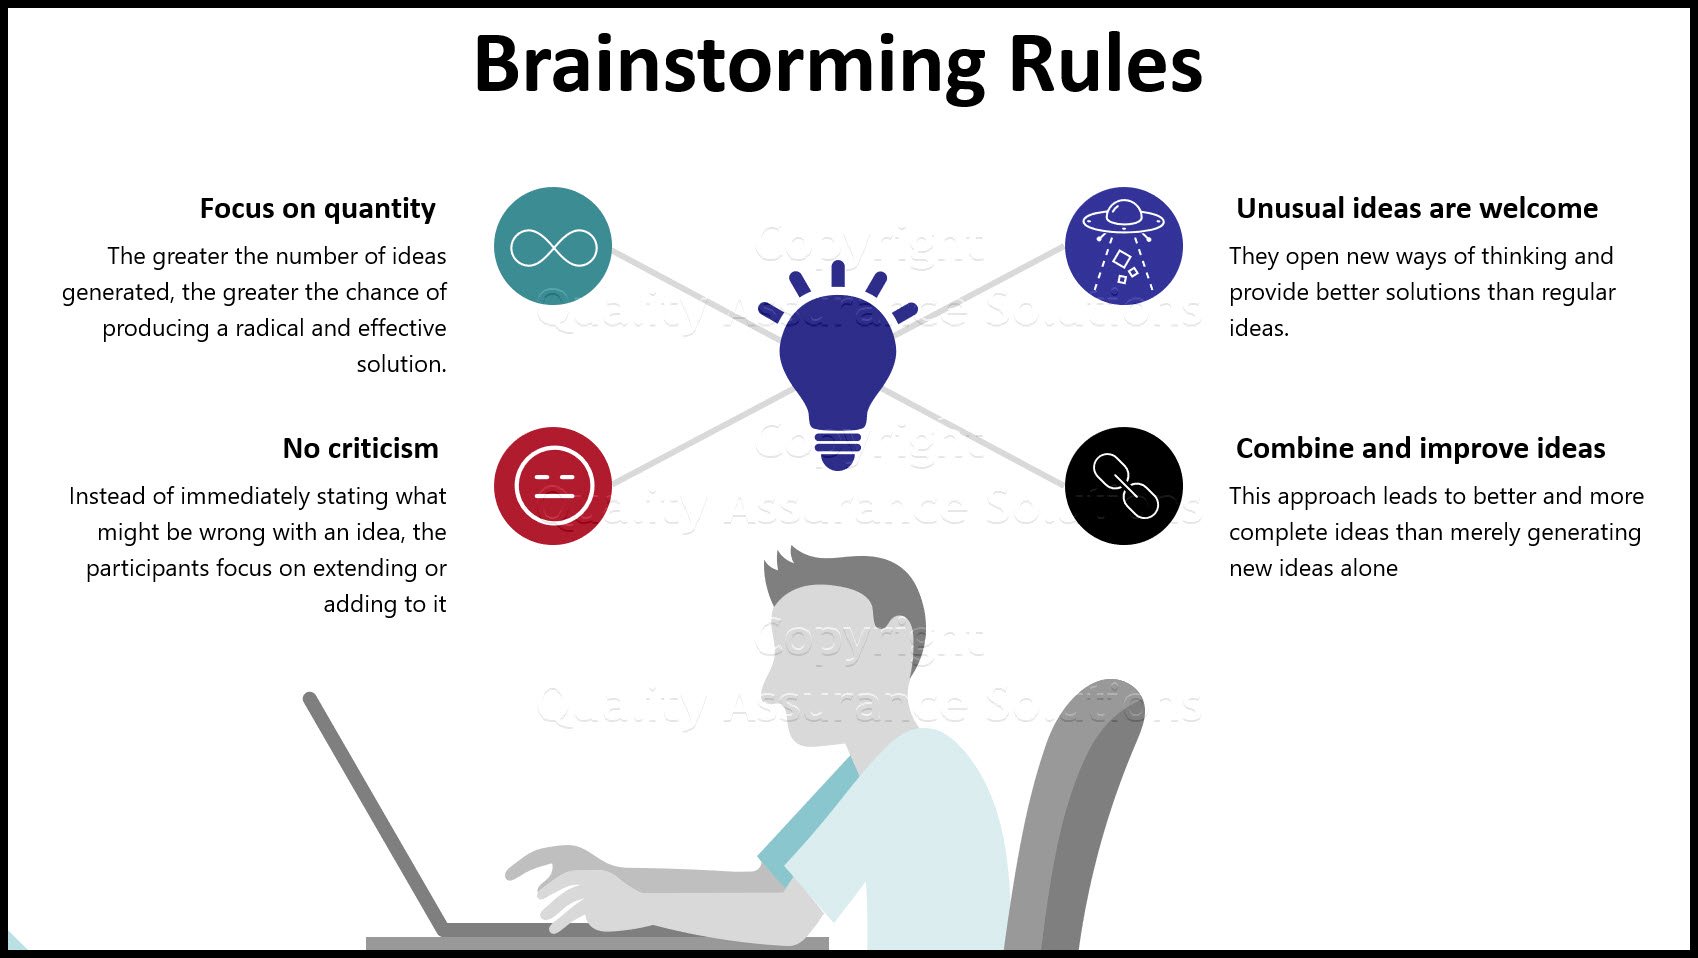 Learn the brainstorming process steps, guidelines and multivoting